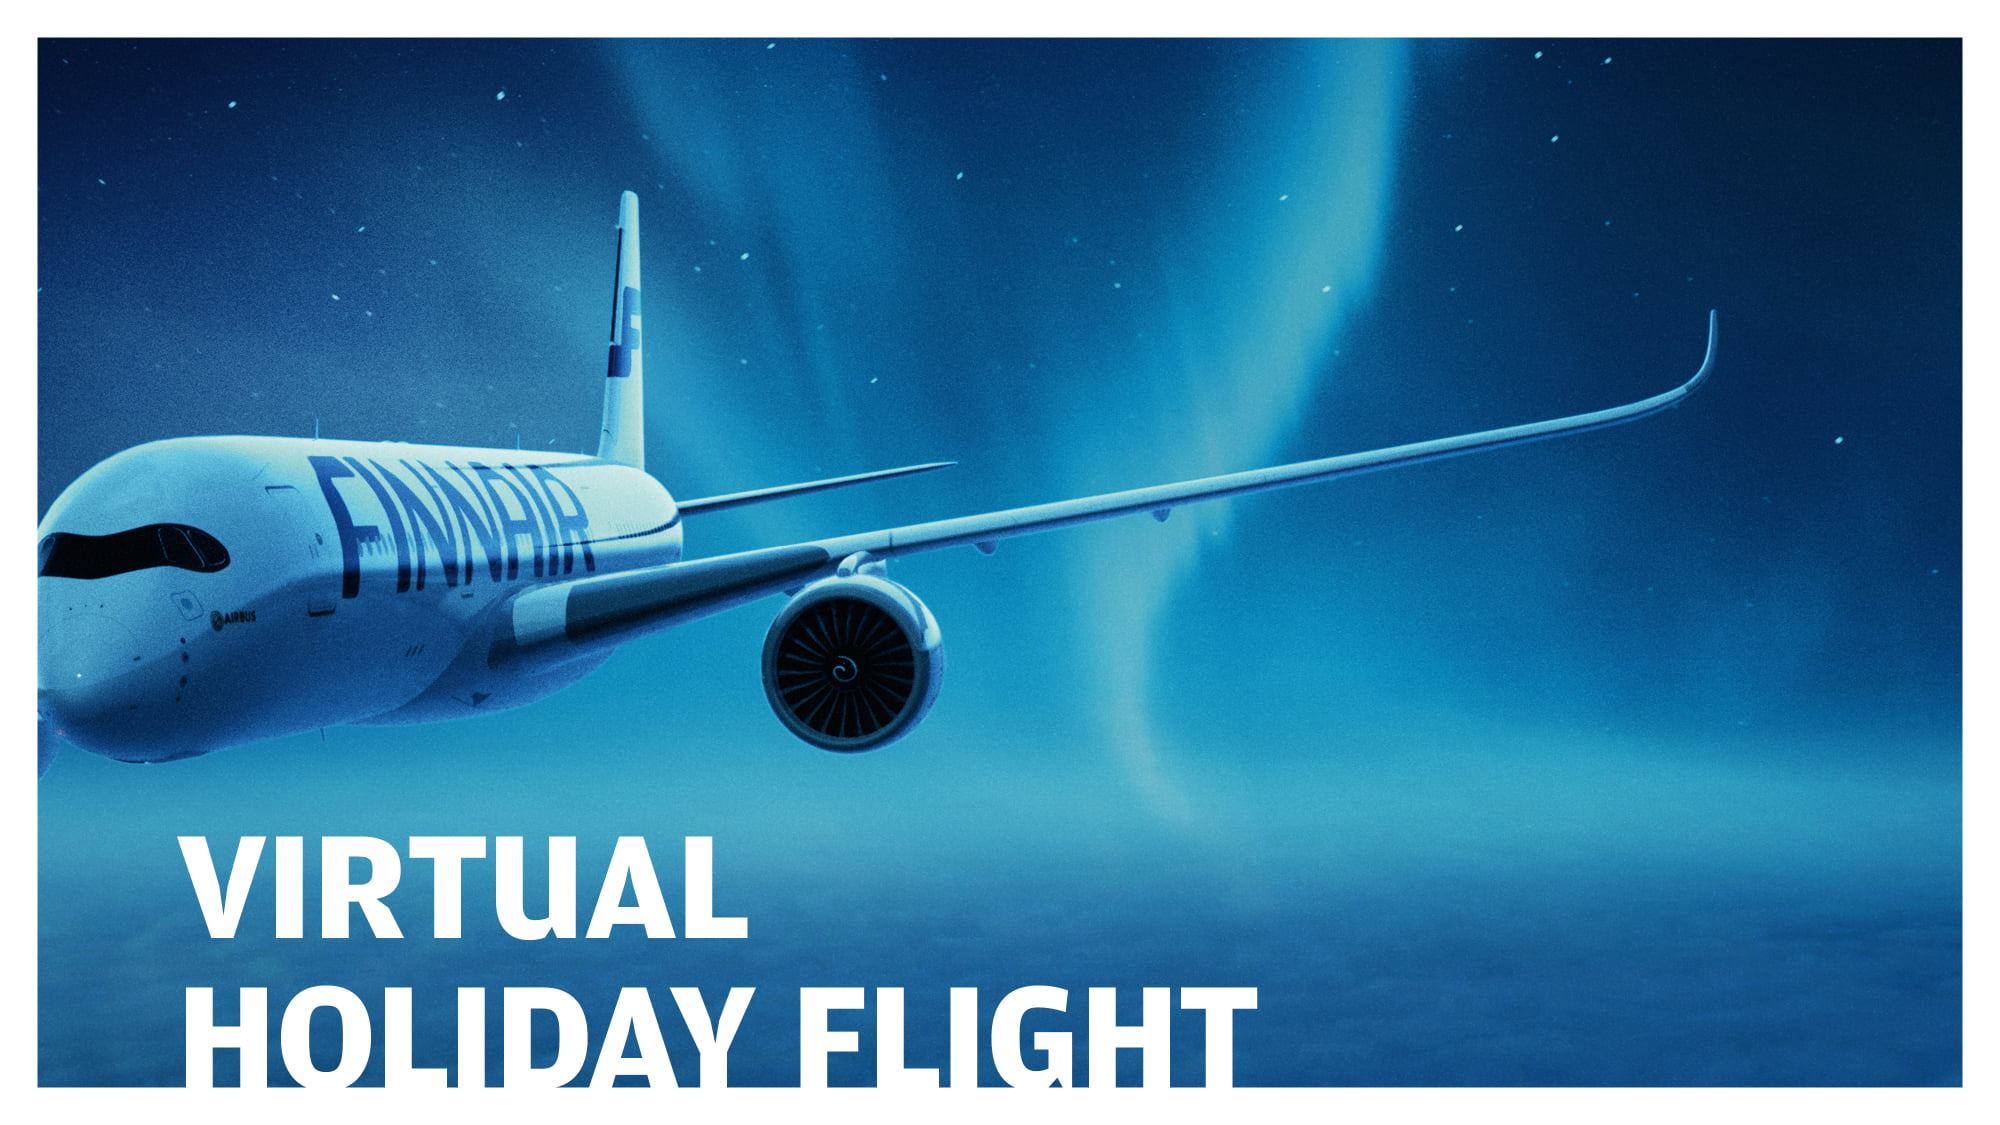 Fly virtual flight to Santa's hometown and support UNICEF's work with Finnair